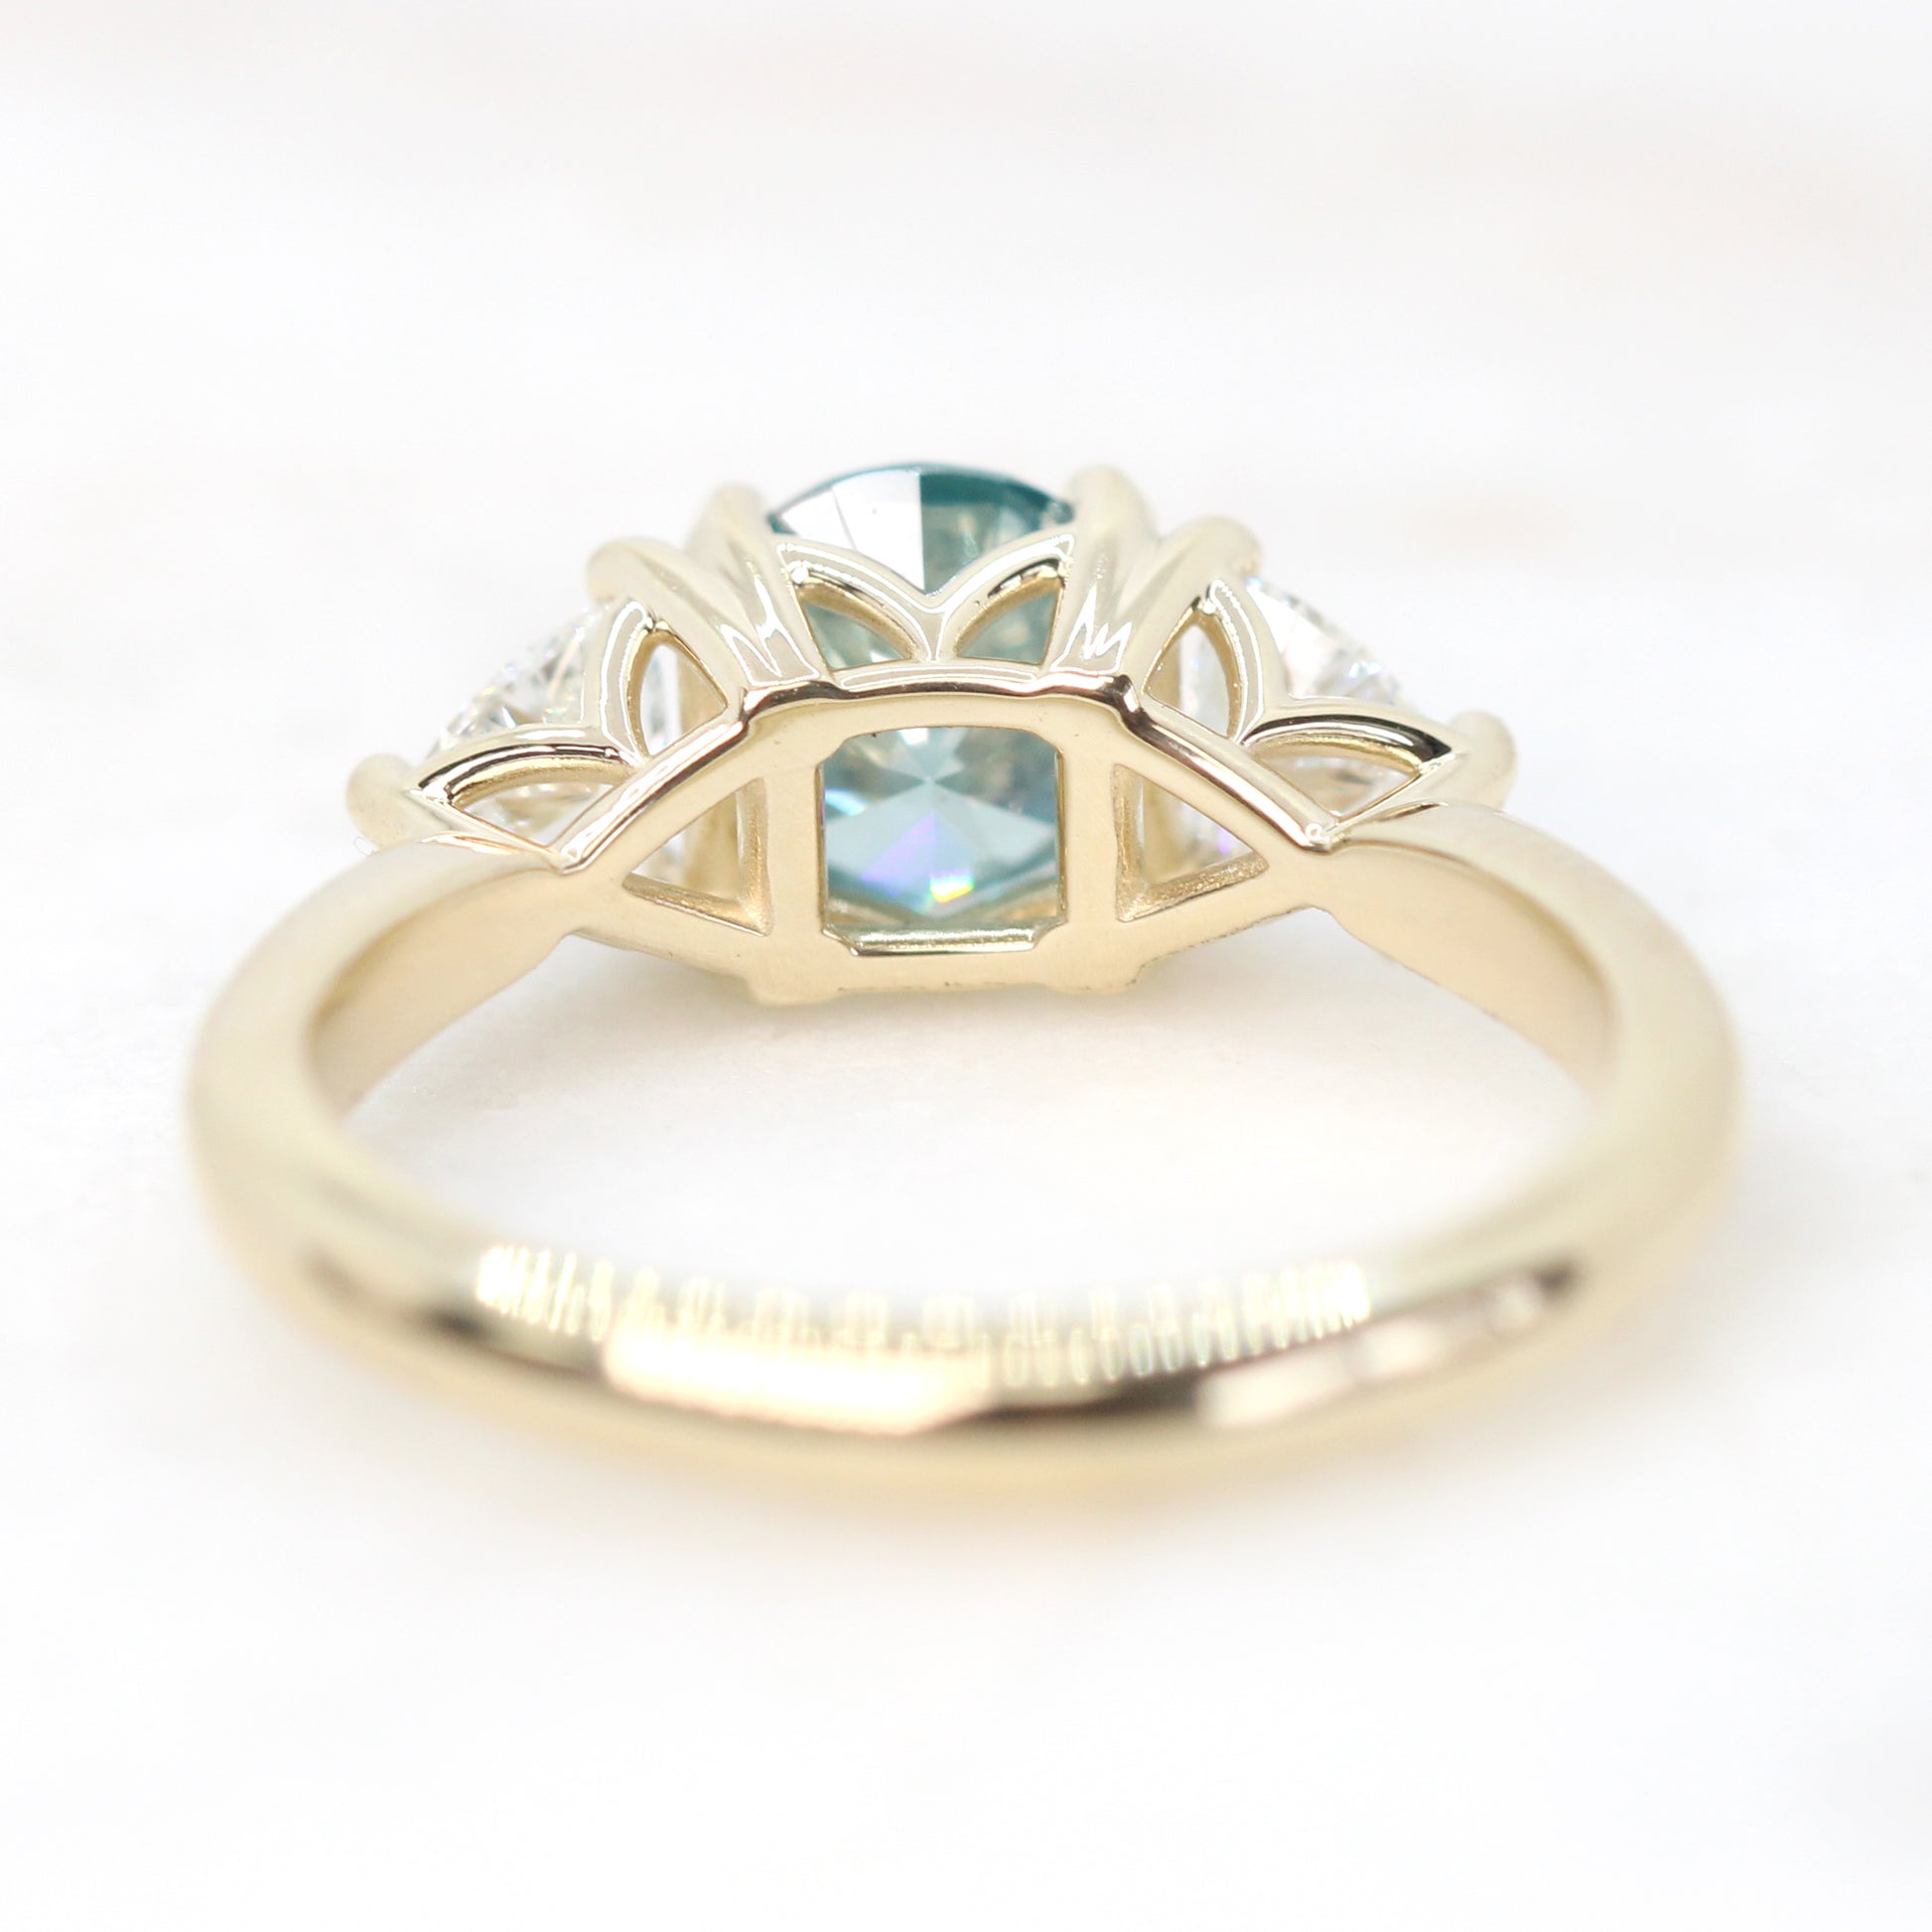 Nolen Ring with a 1.00 Carat Round Teal Diamond and White Accent Diamonds in 14k Yellow Gold - Ready to Size and Ship - Midwinter Co. Alternative Bridal Rings and Modern Fine Jewelry